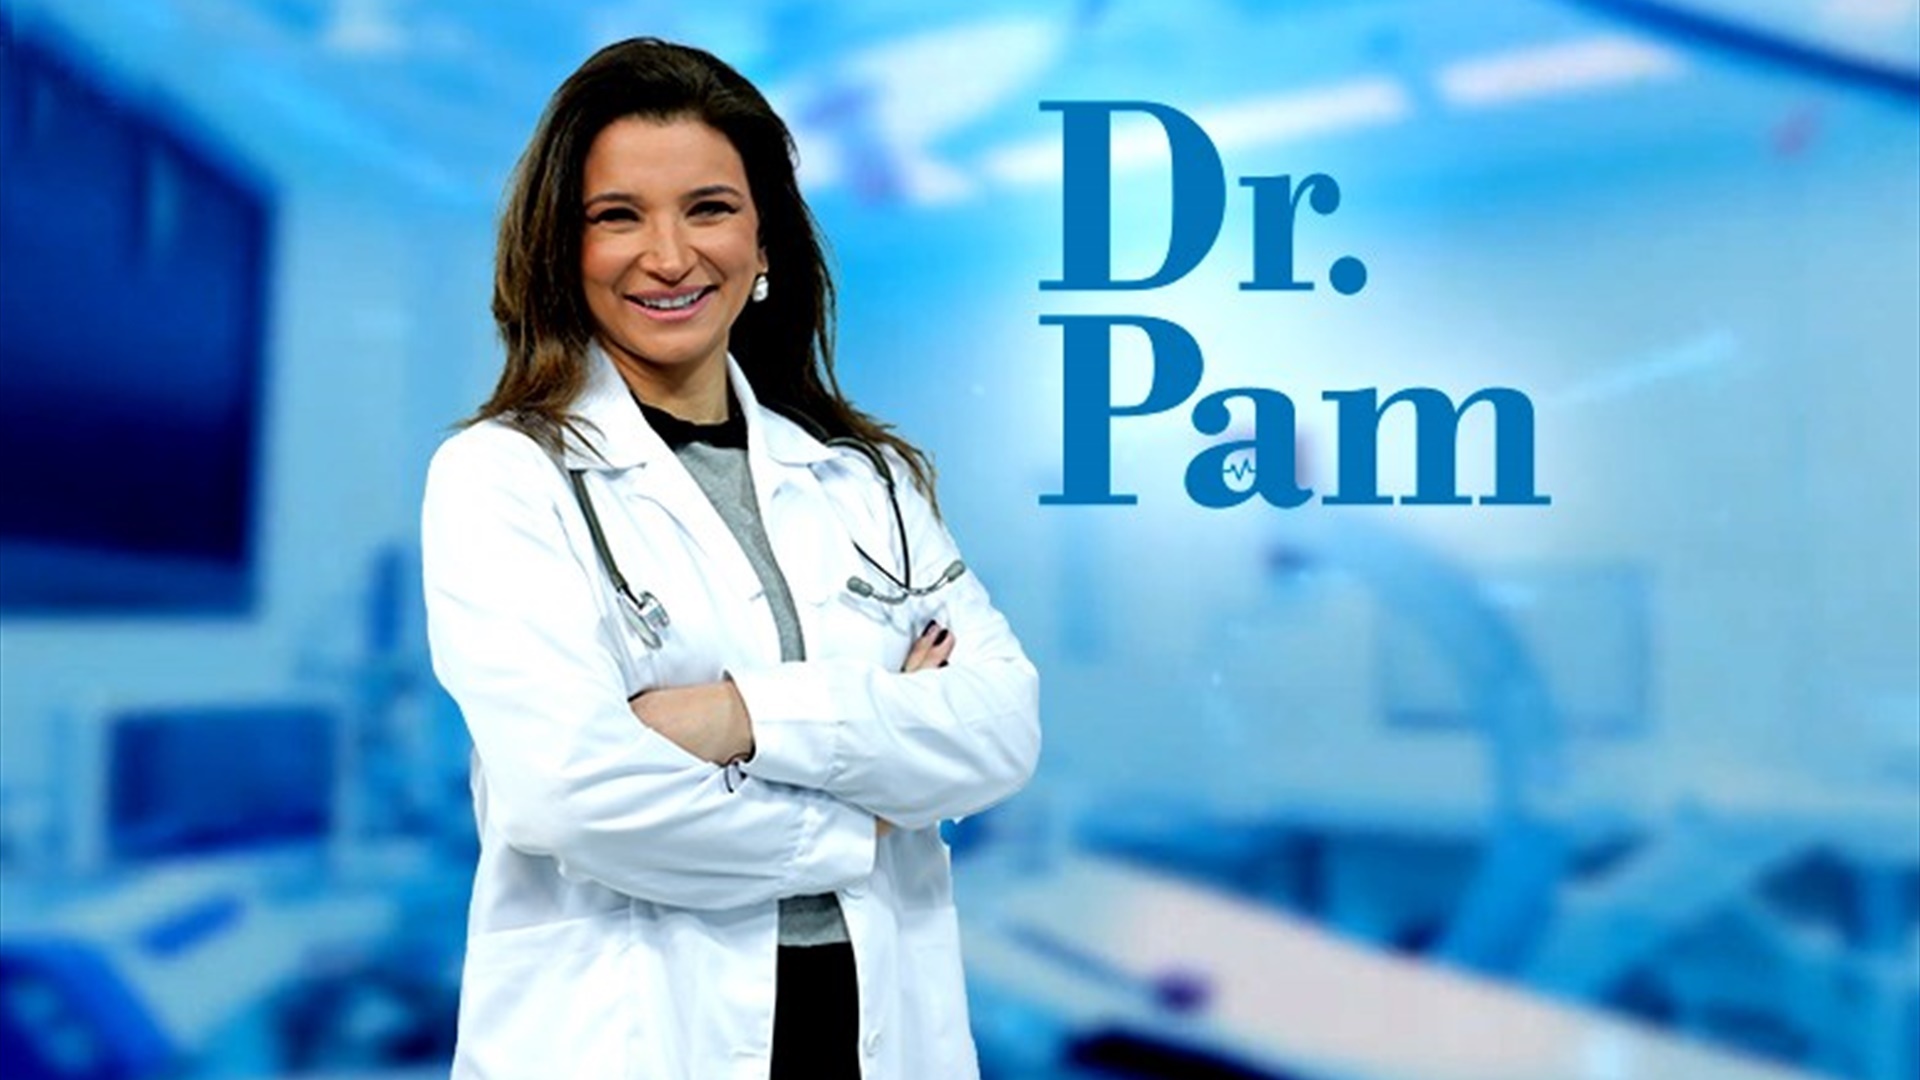 Dr. Pam